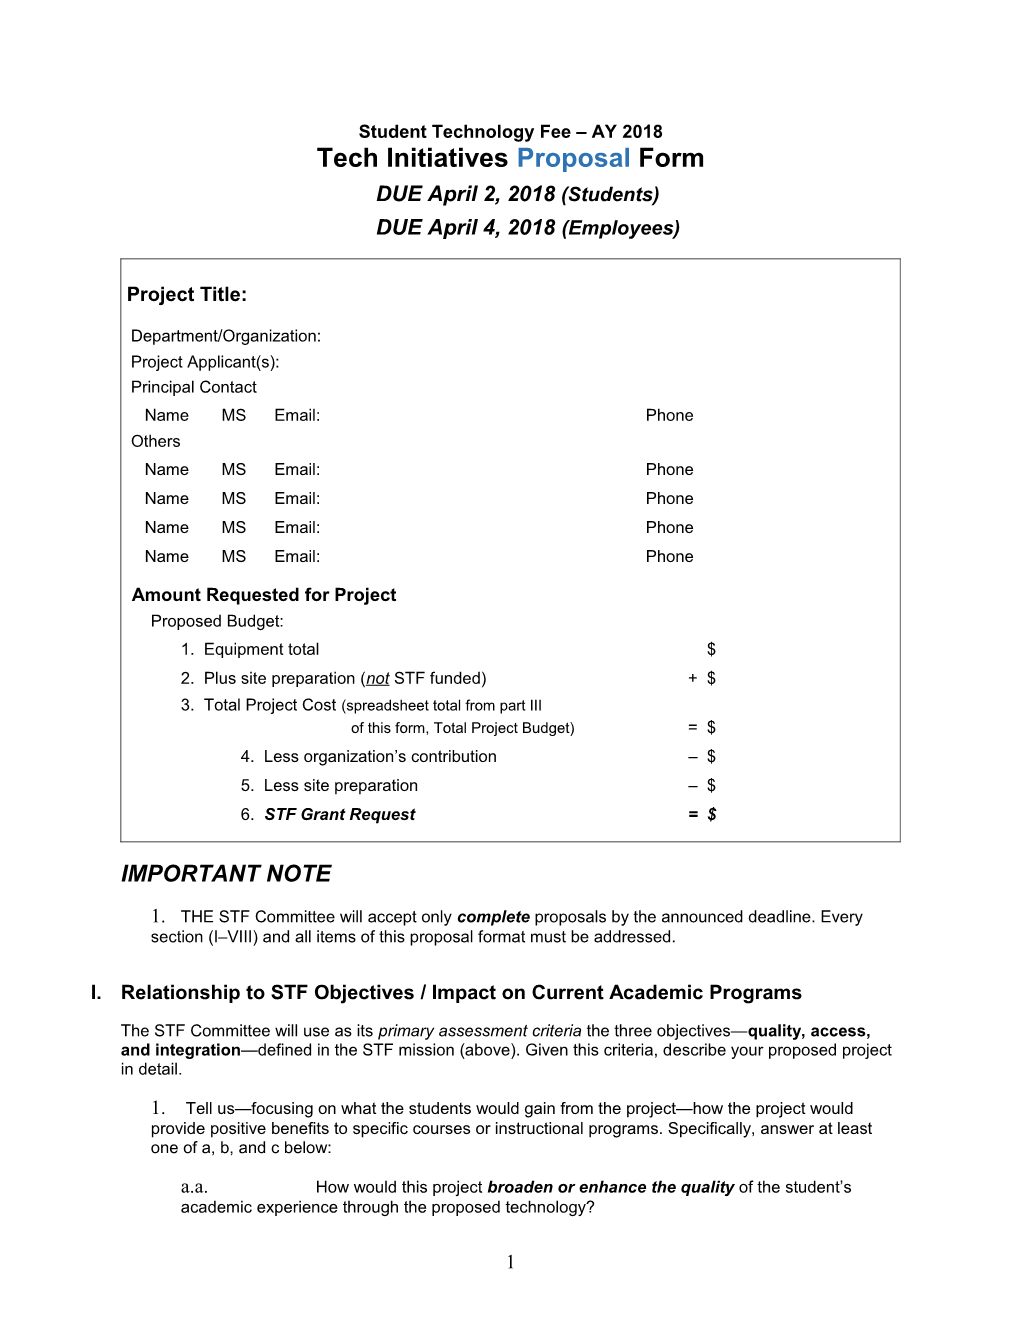 Student Technology Fee Proposal Form